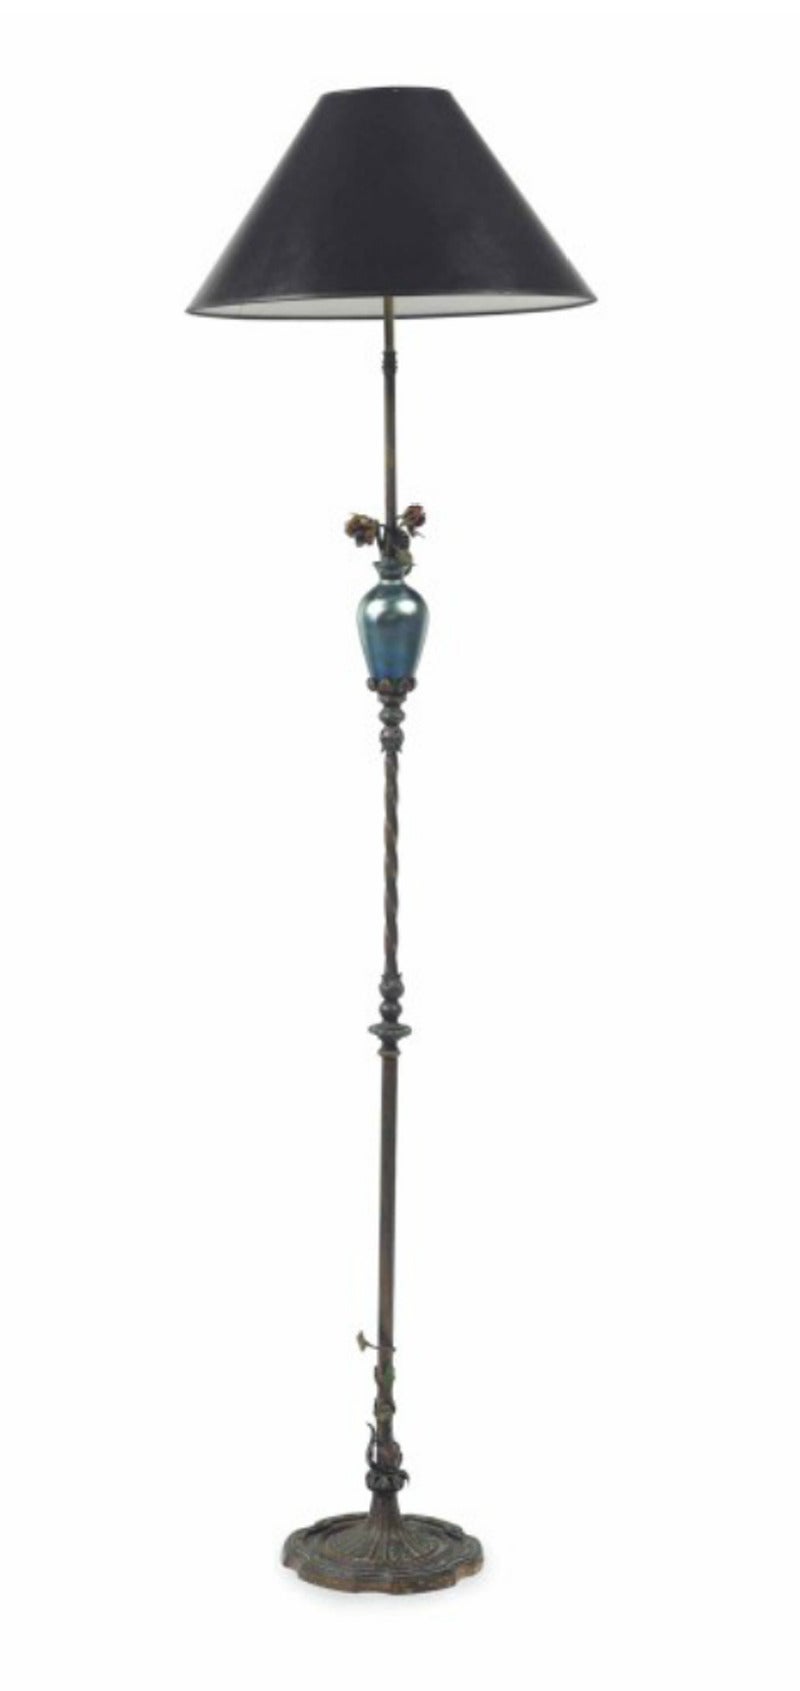 A polychrome decorated metal.
And iridescent glass-mounted floor lamp.
The glass possibly Steuben,
early 20th century.

Measure: Height 69in. 

Provenance: 
Property from the Bel air estate of Drs. Isobel & Salim Dalali.
Le Trianon Fine Art